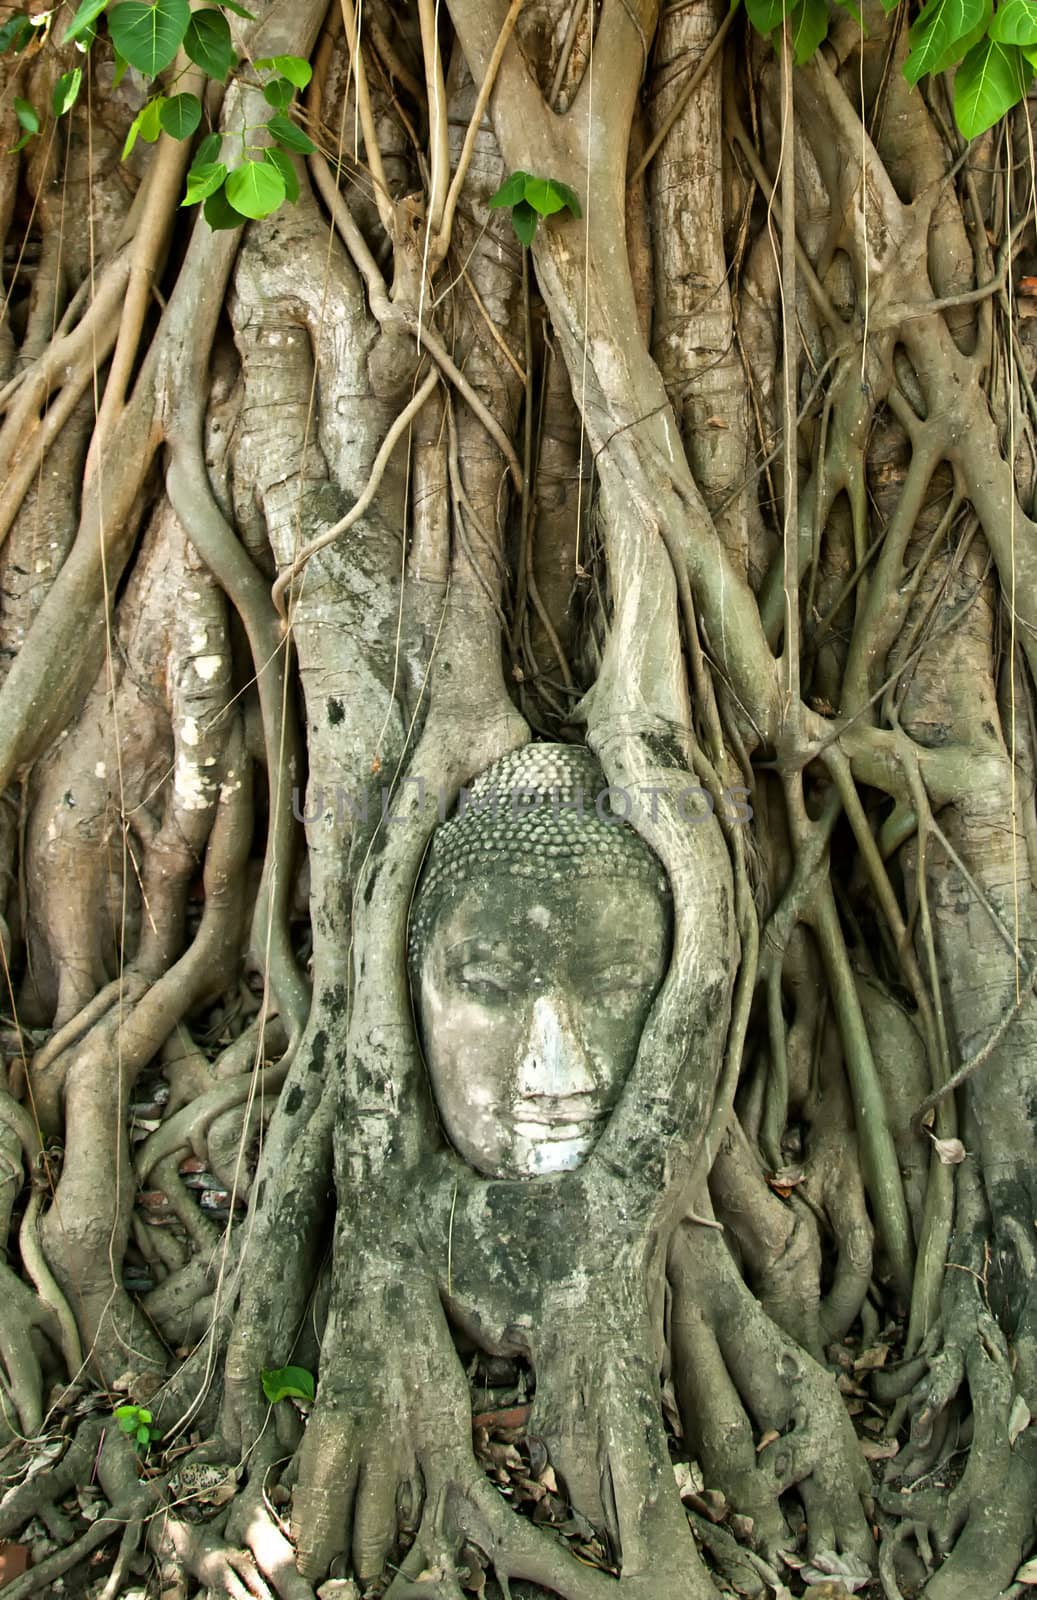 Buddha Head engulfed by tentacle-like tree roots in Ayuthaya, Thailand